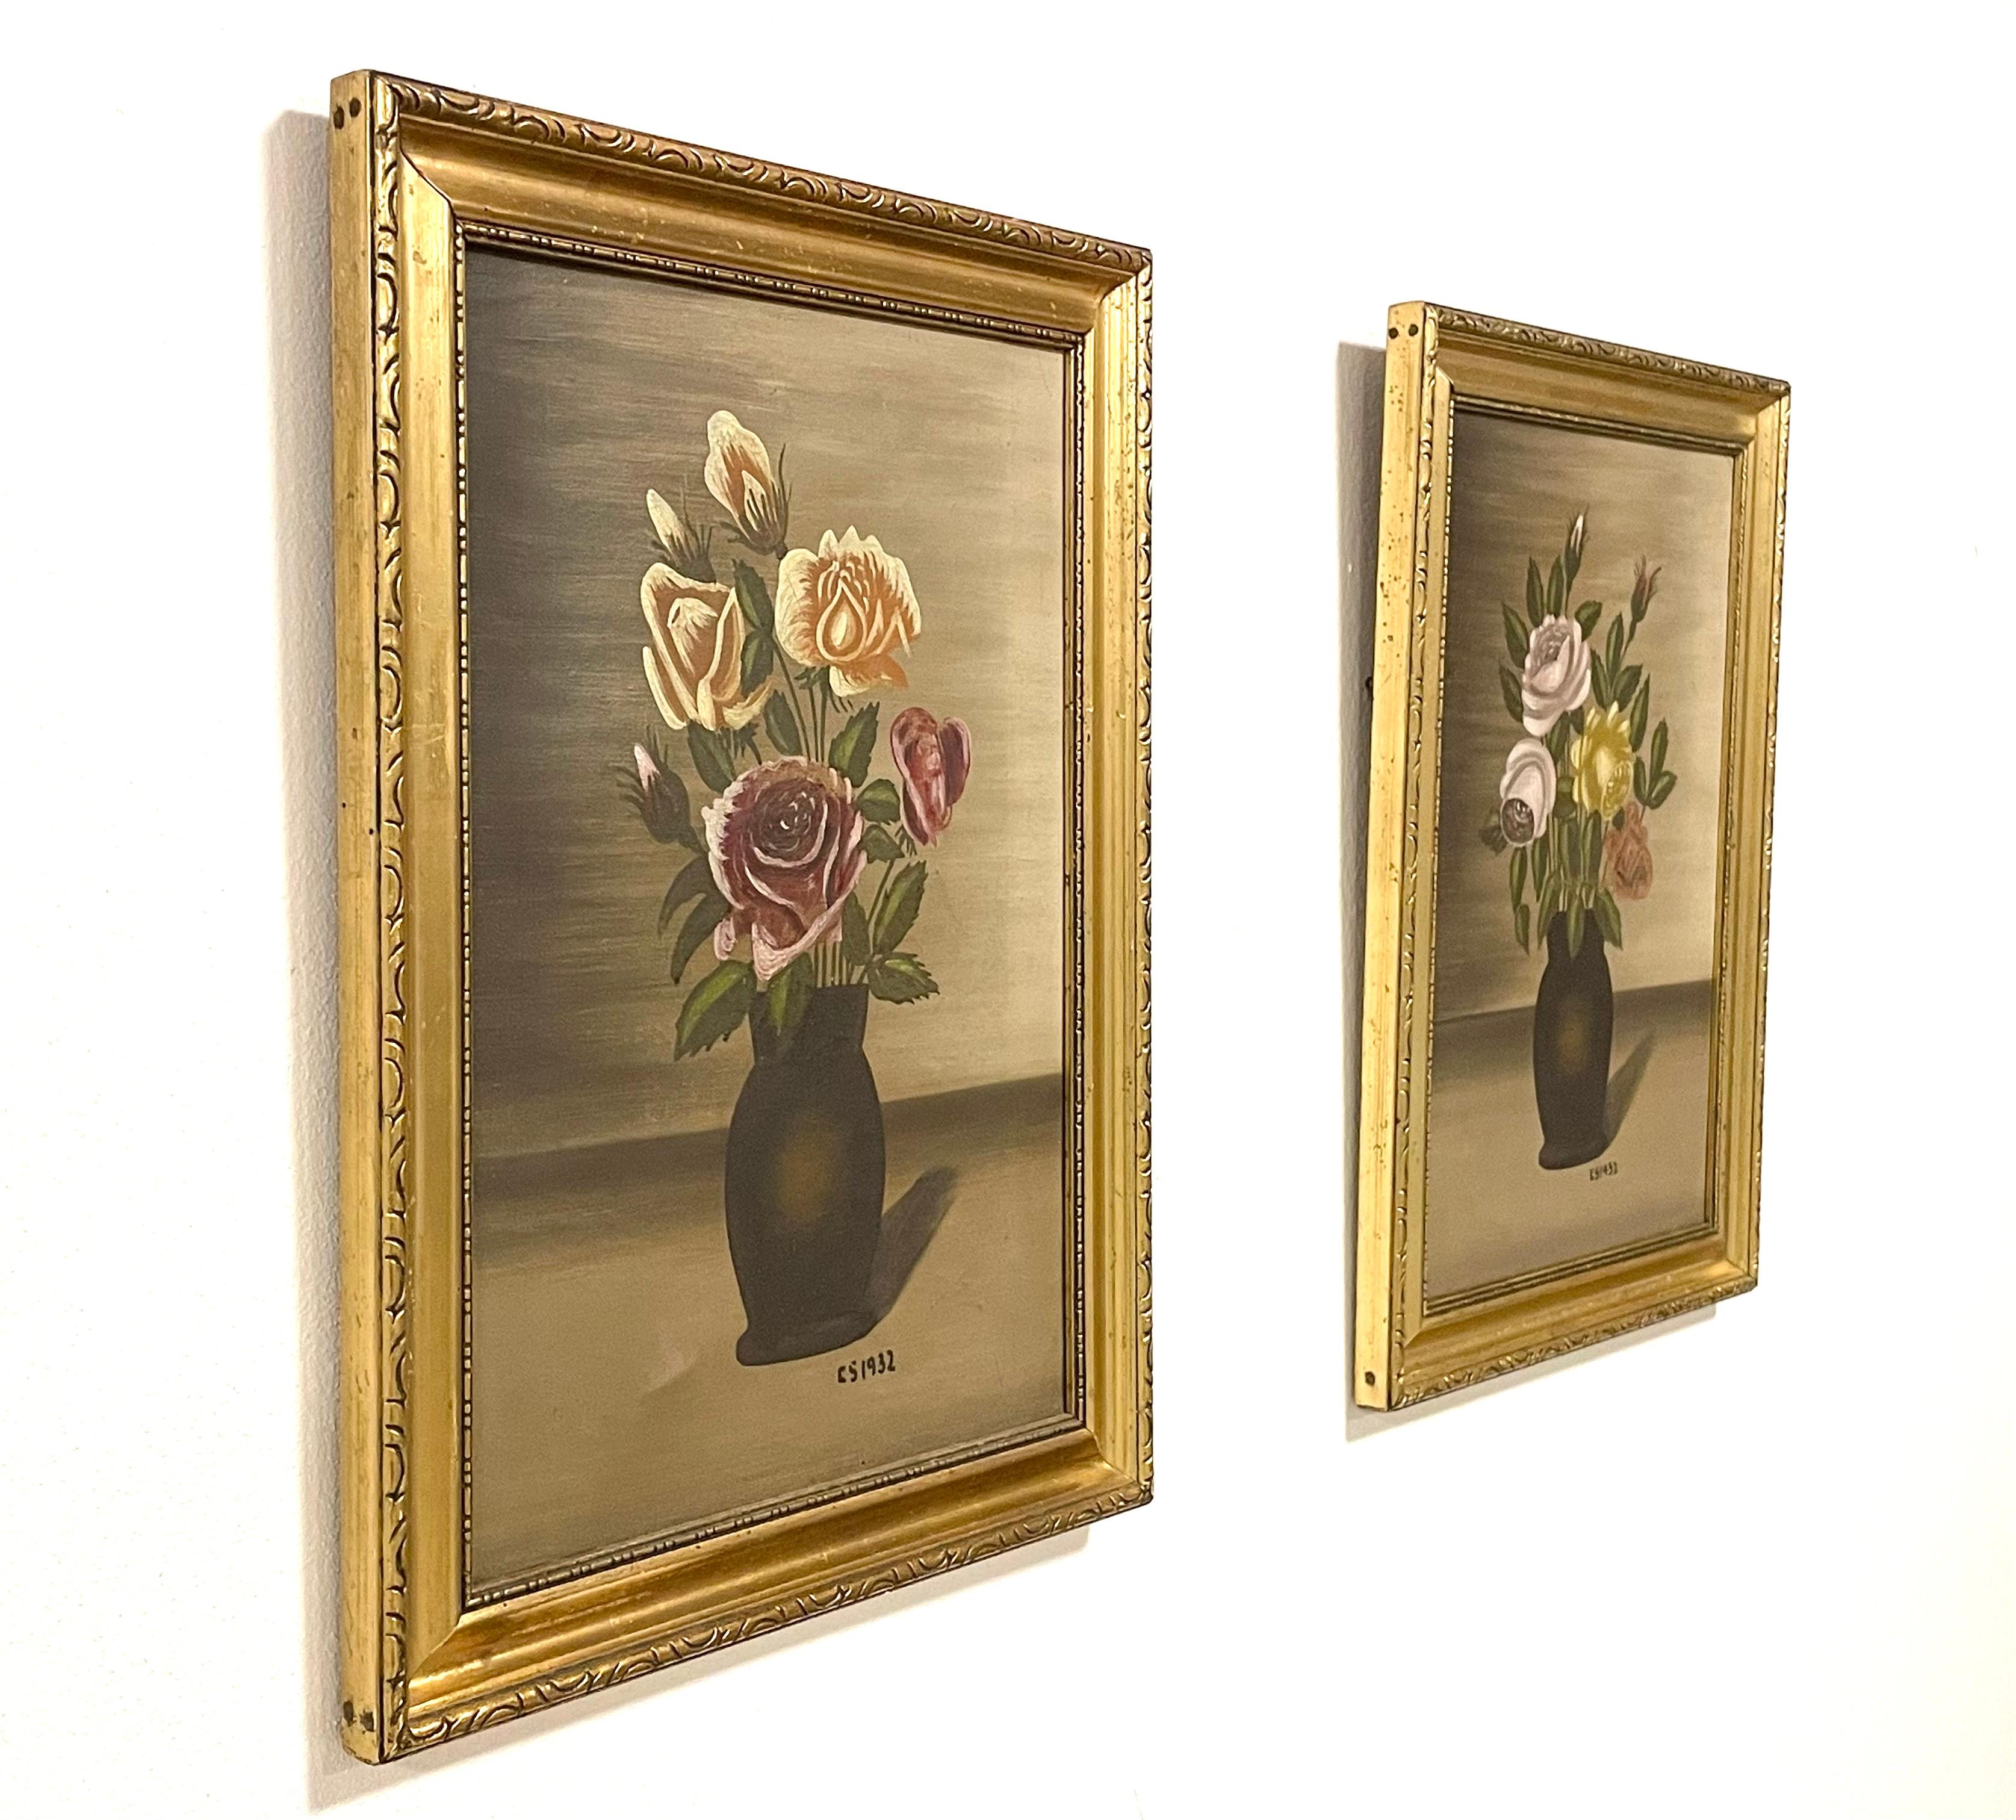 This is a pair of original Danish oil on canvas still life flower paintings from 1932 by artist CS.

They are signed by the artist in the bottom right corner and framed in beautiful gold painted solid wooden frames.

The paintings are in good